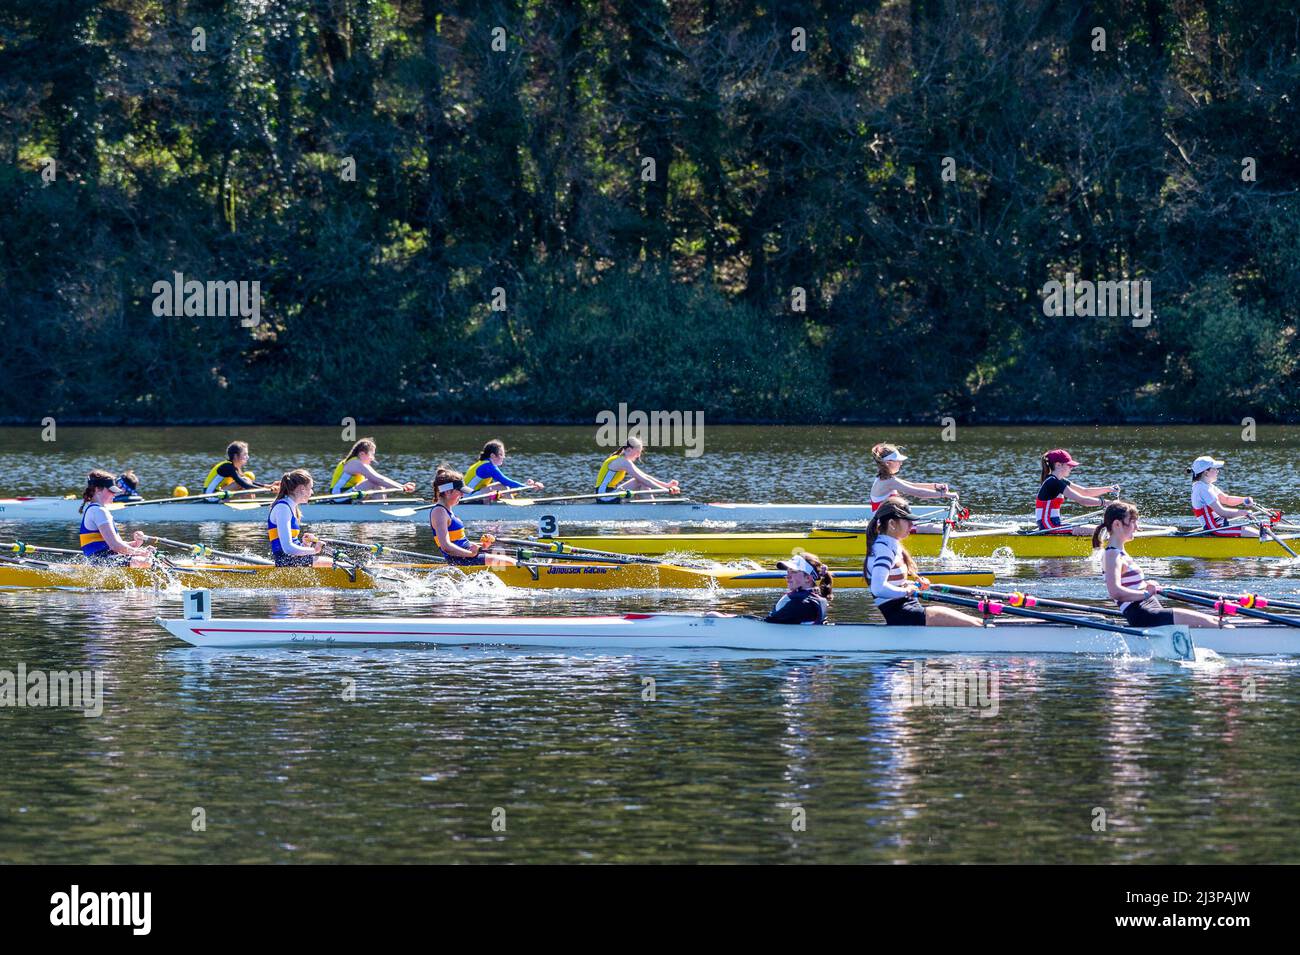 Drinagh, West Cork, Ireland. 9th Apr, 2022. Skibbereen Rowing Club held a 1km regatta on Drinagh lake today. Clubs attended from across Munster on what was a very sunny and warm day. The racing was very close throughout the day. Credit: AG News/Alamy Live News Stock Photo